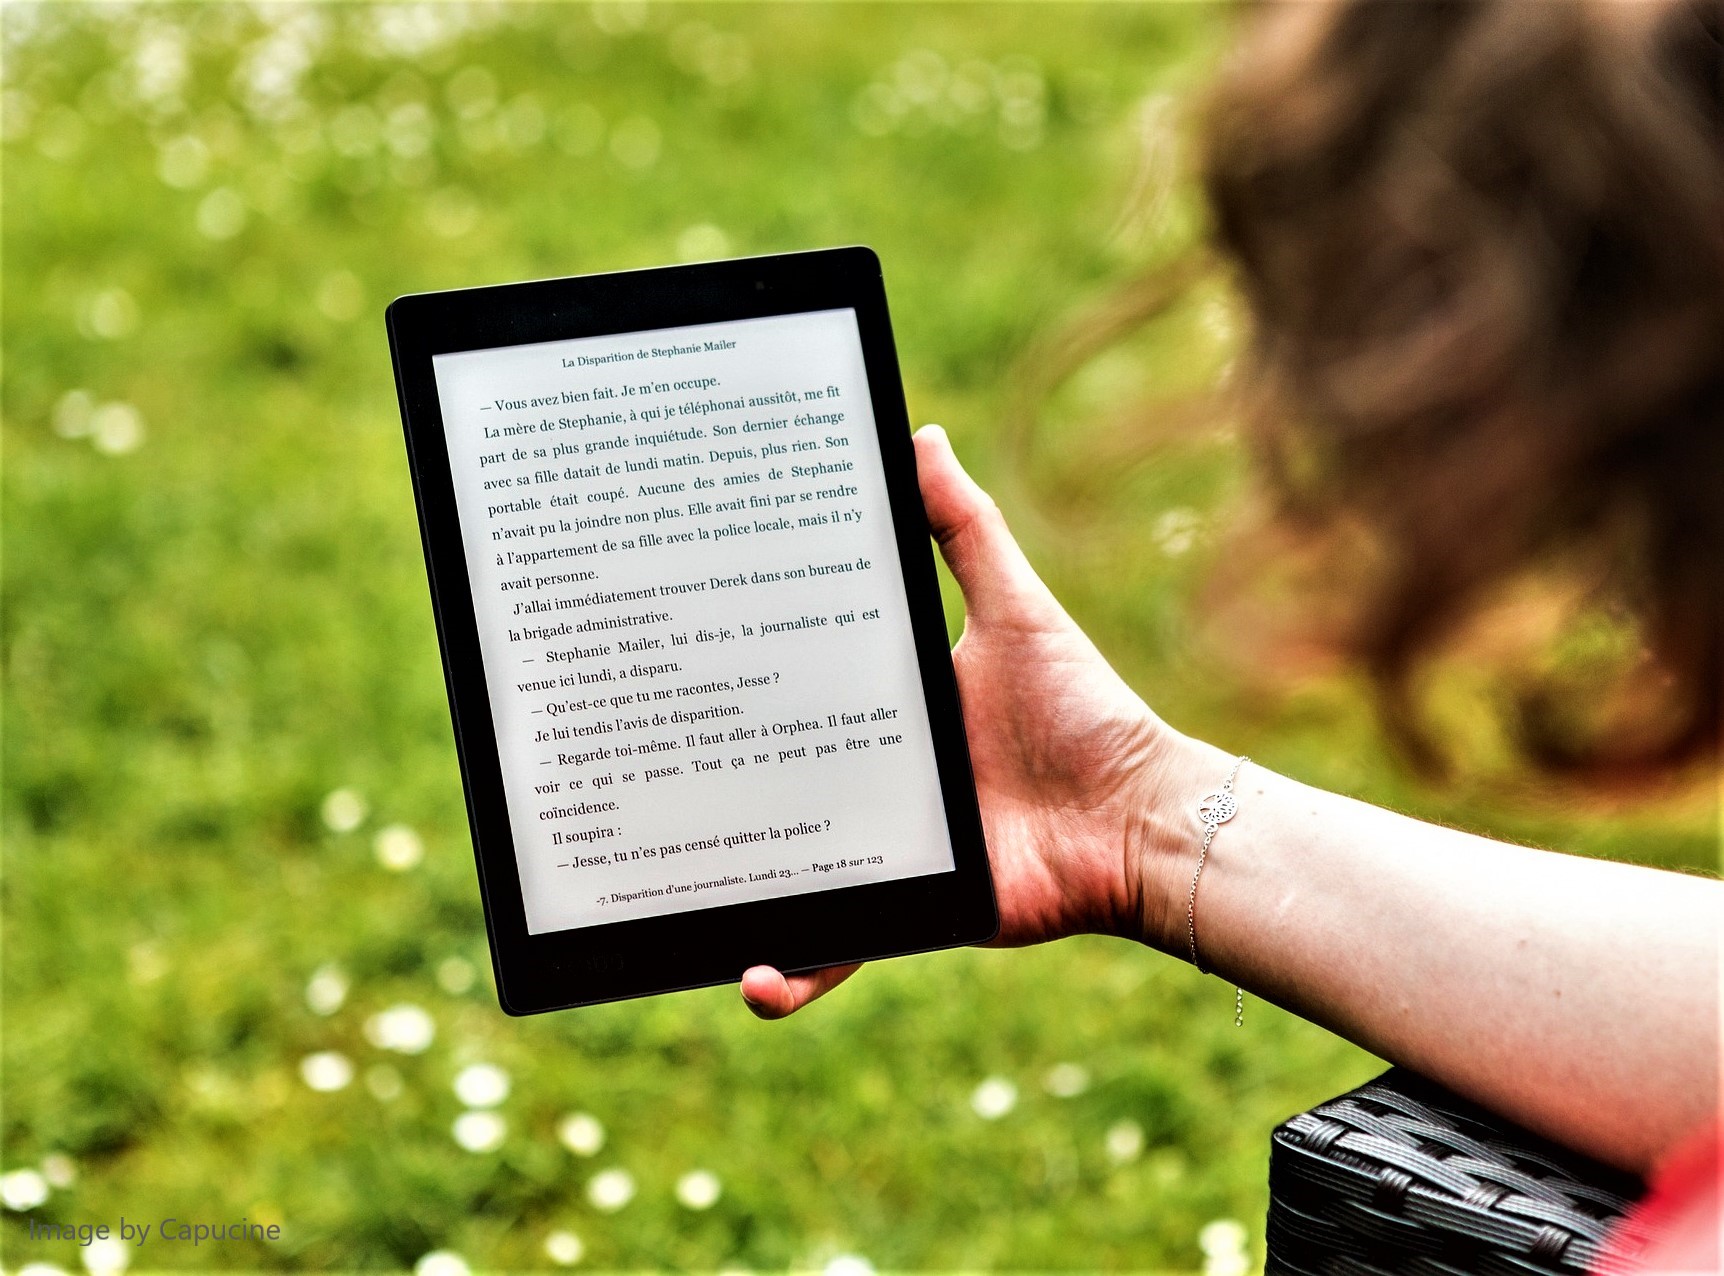 Are e-readers more eco-friendly than paperbacks?